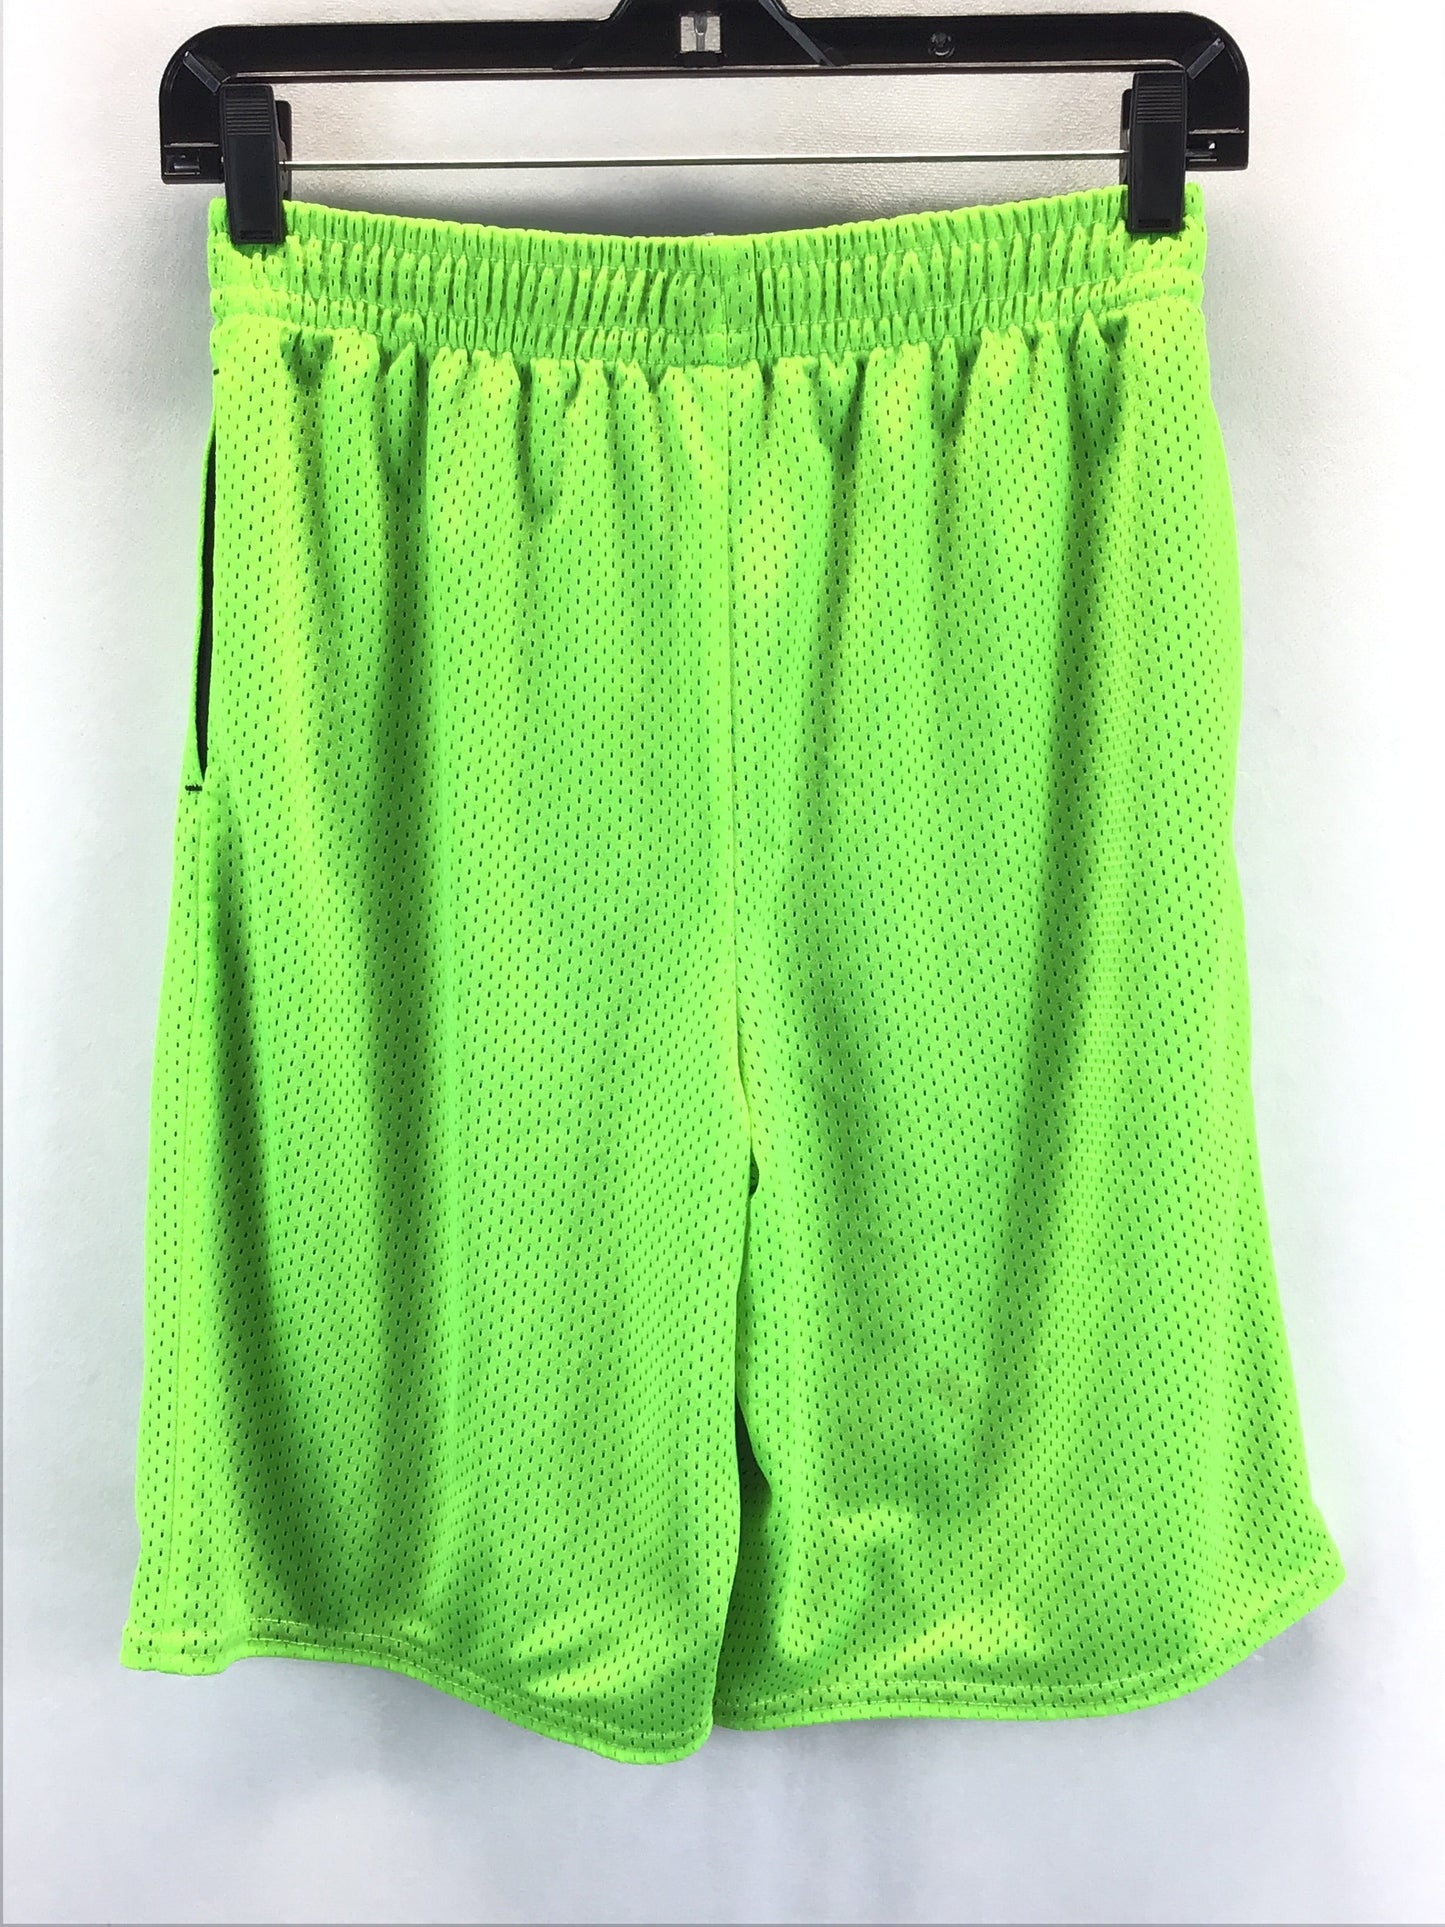 Green Athletic Shorts Athletic Works, Size 2x